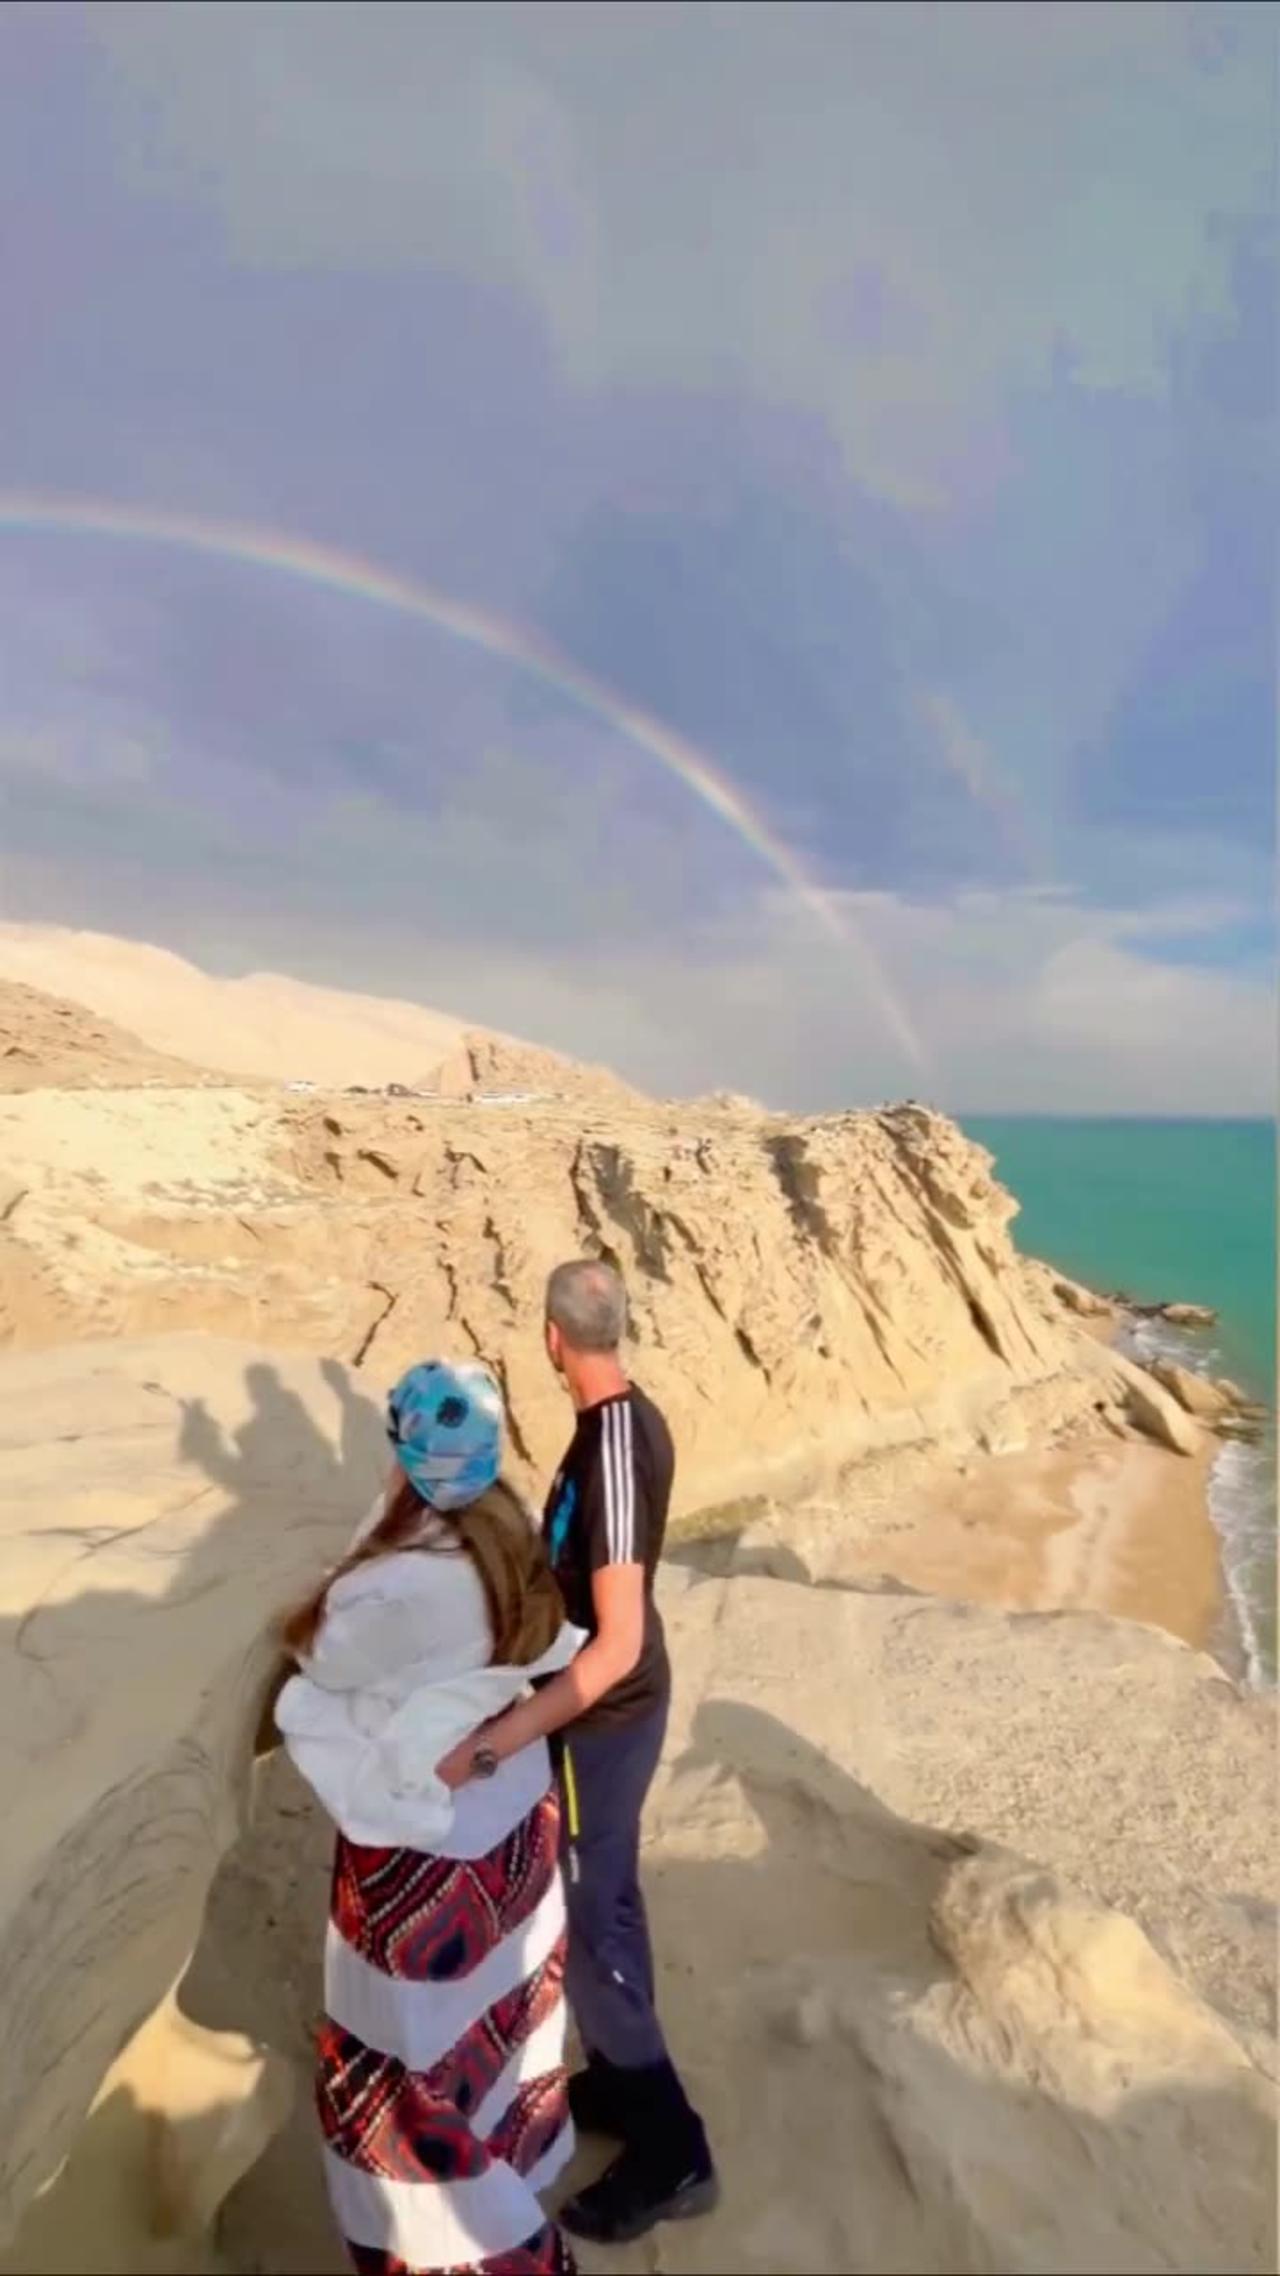 The beautiful pass of lovers in the city of Parsian, Hormozgan province in Iran